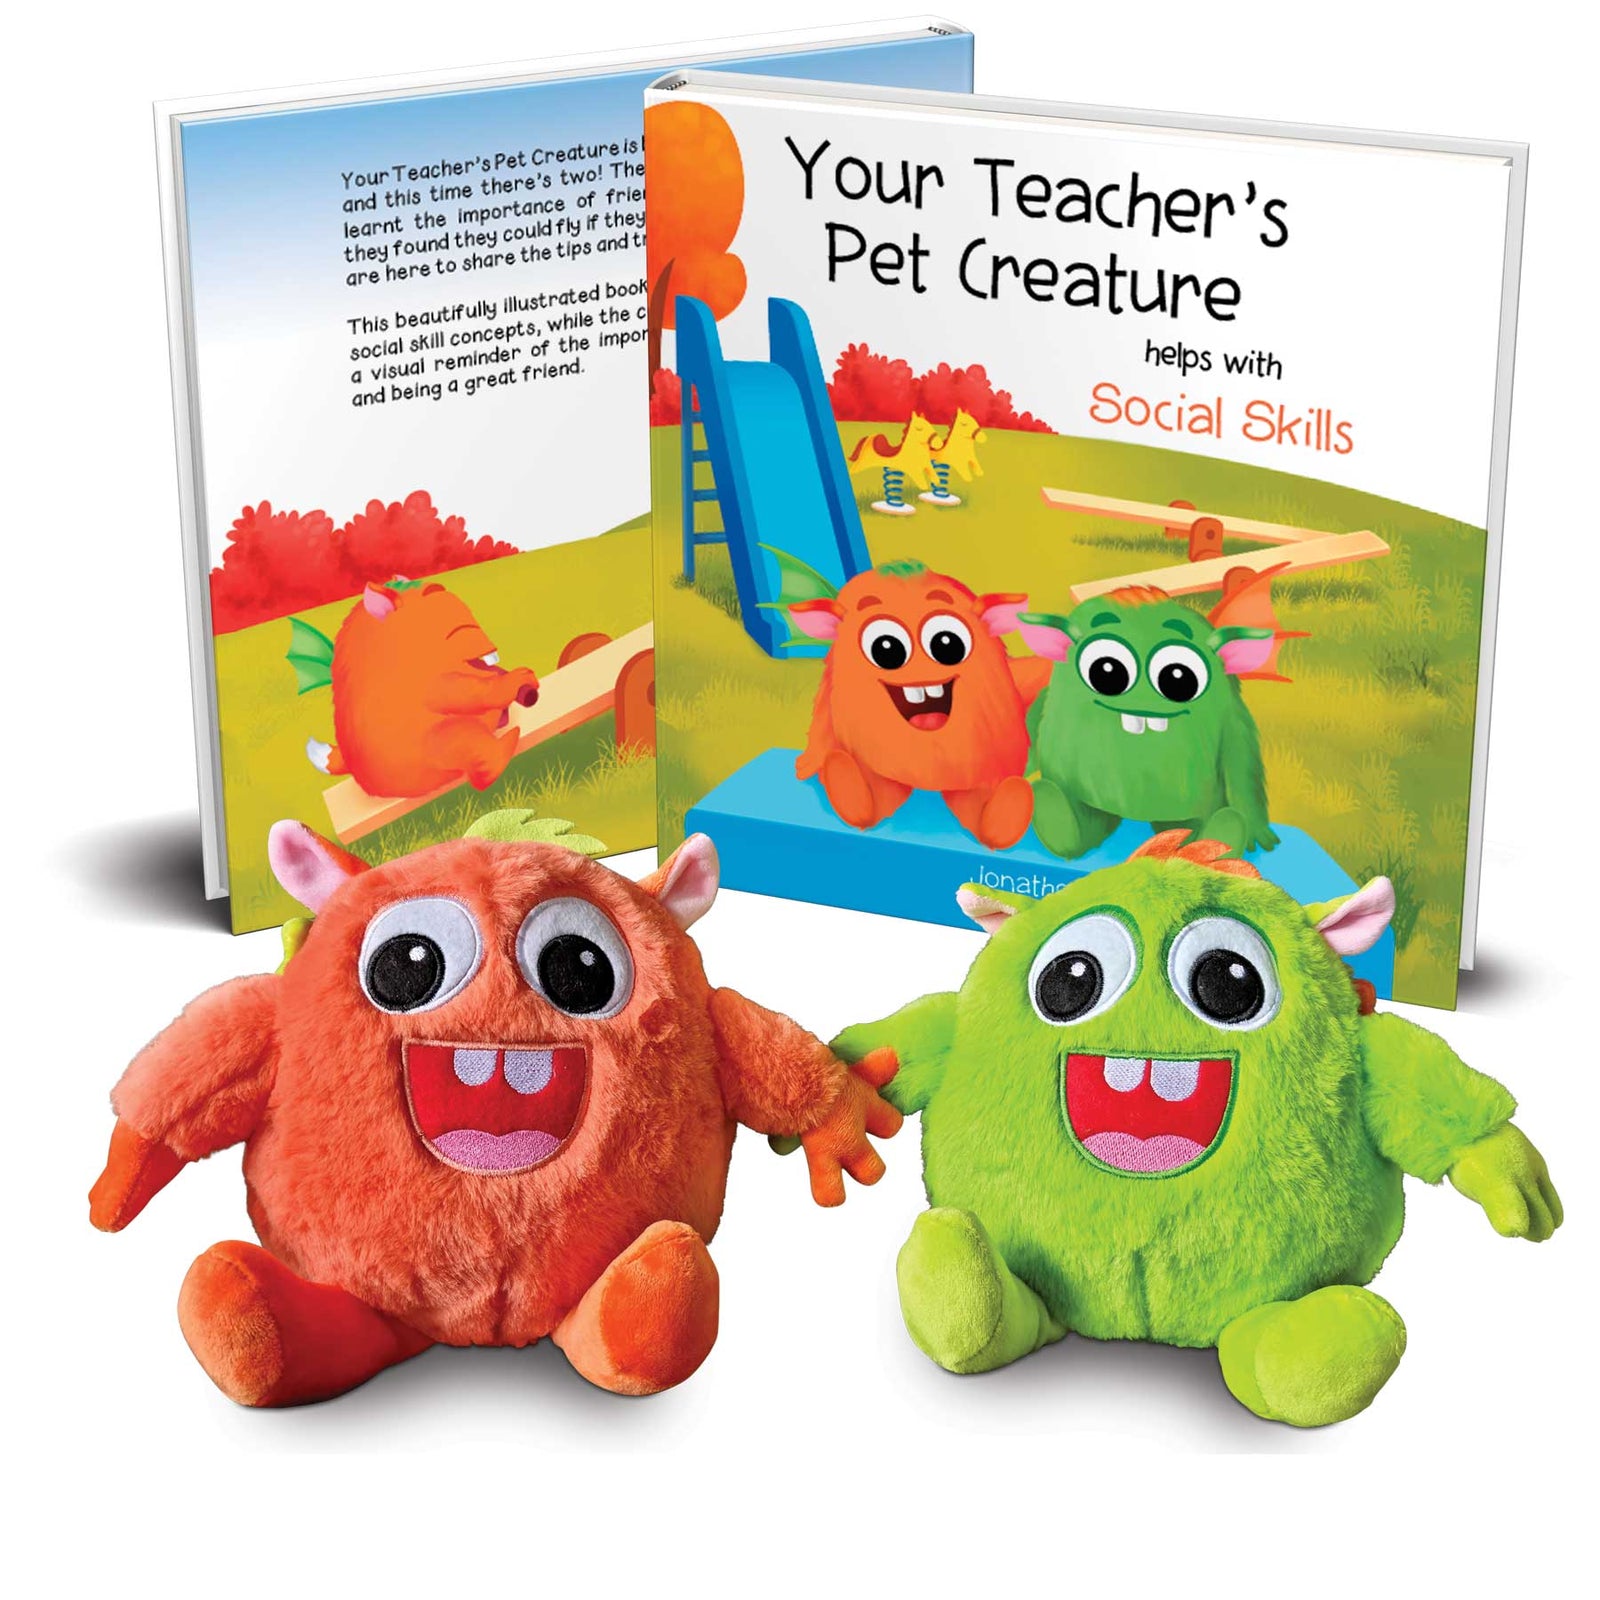 The Six Stages of Play That Help Students Learn - Your Teacher's Pet  Creature